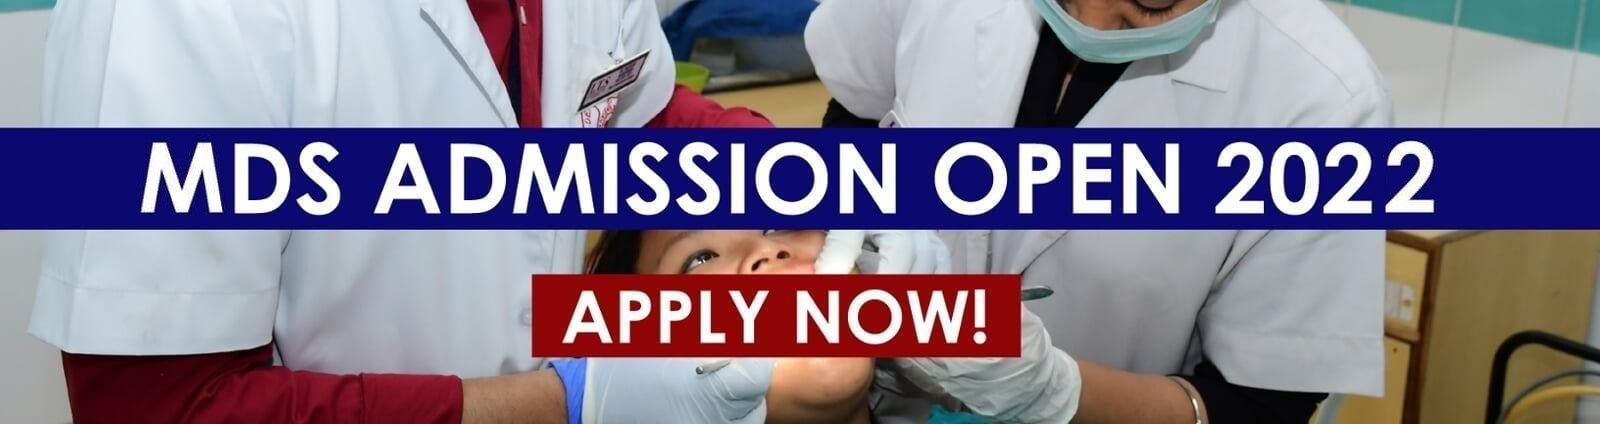 MDS Admissions Open 2022 Apply Now